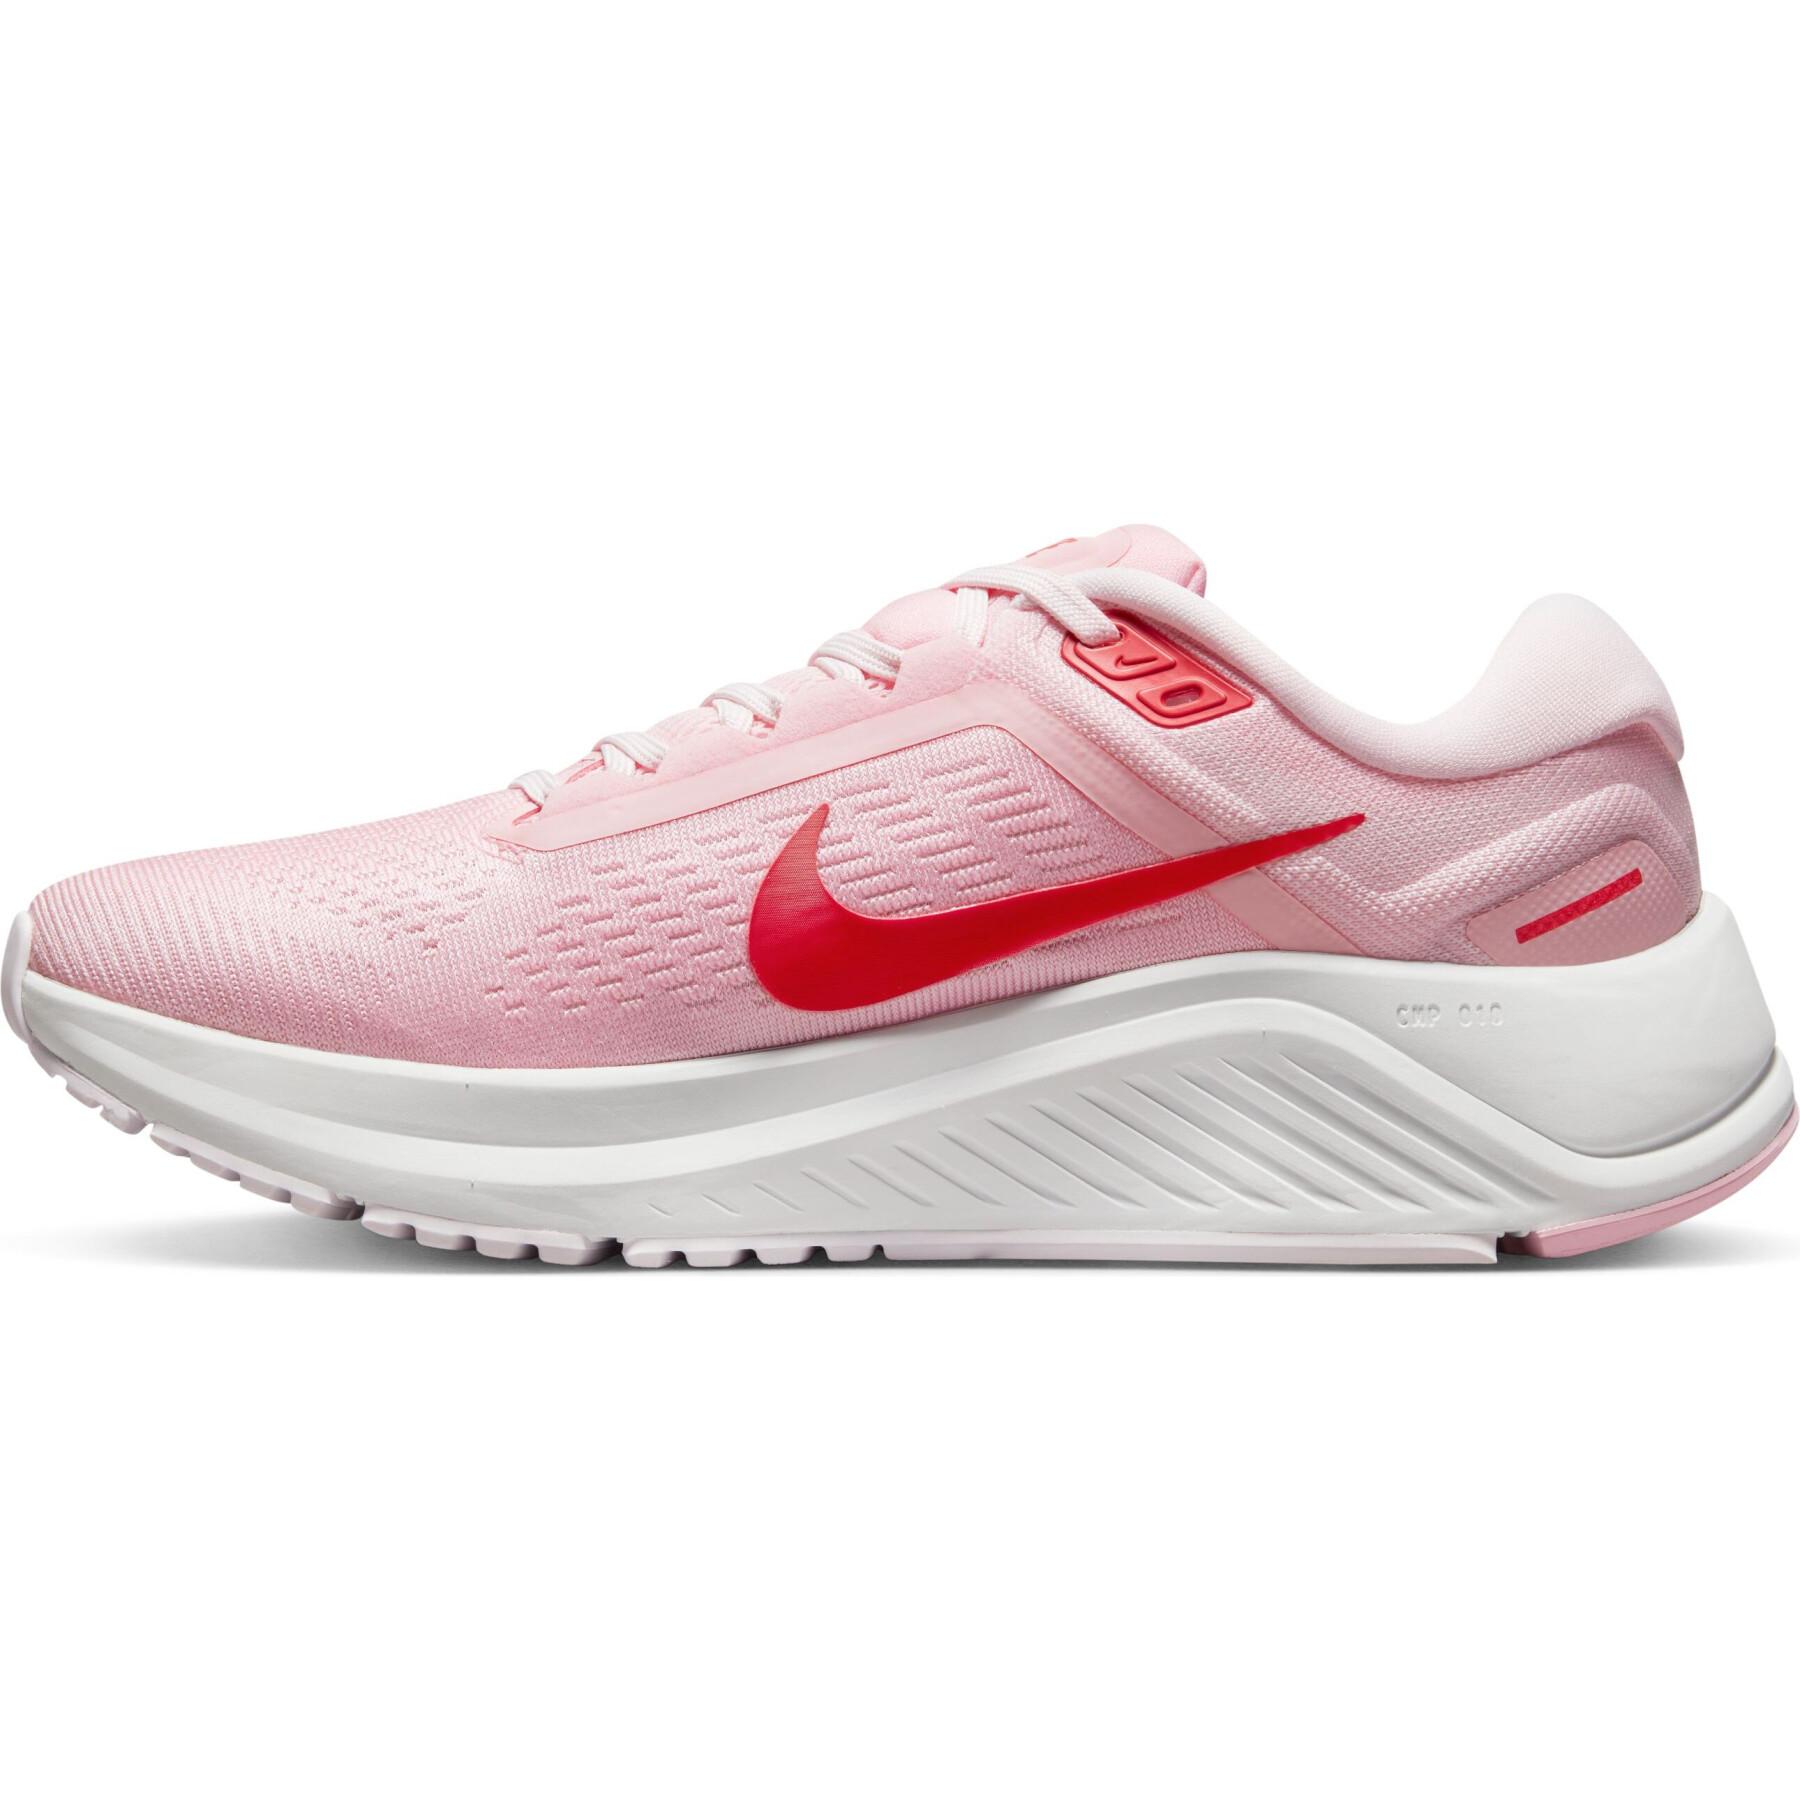 Women's shoes running Nike Structure 24